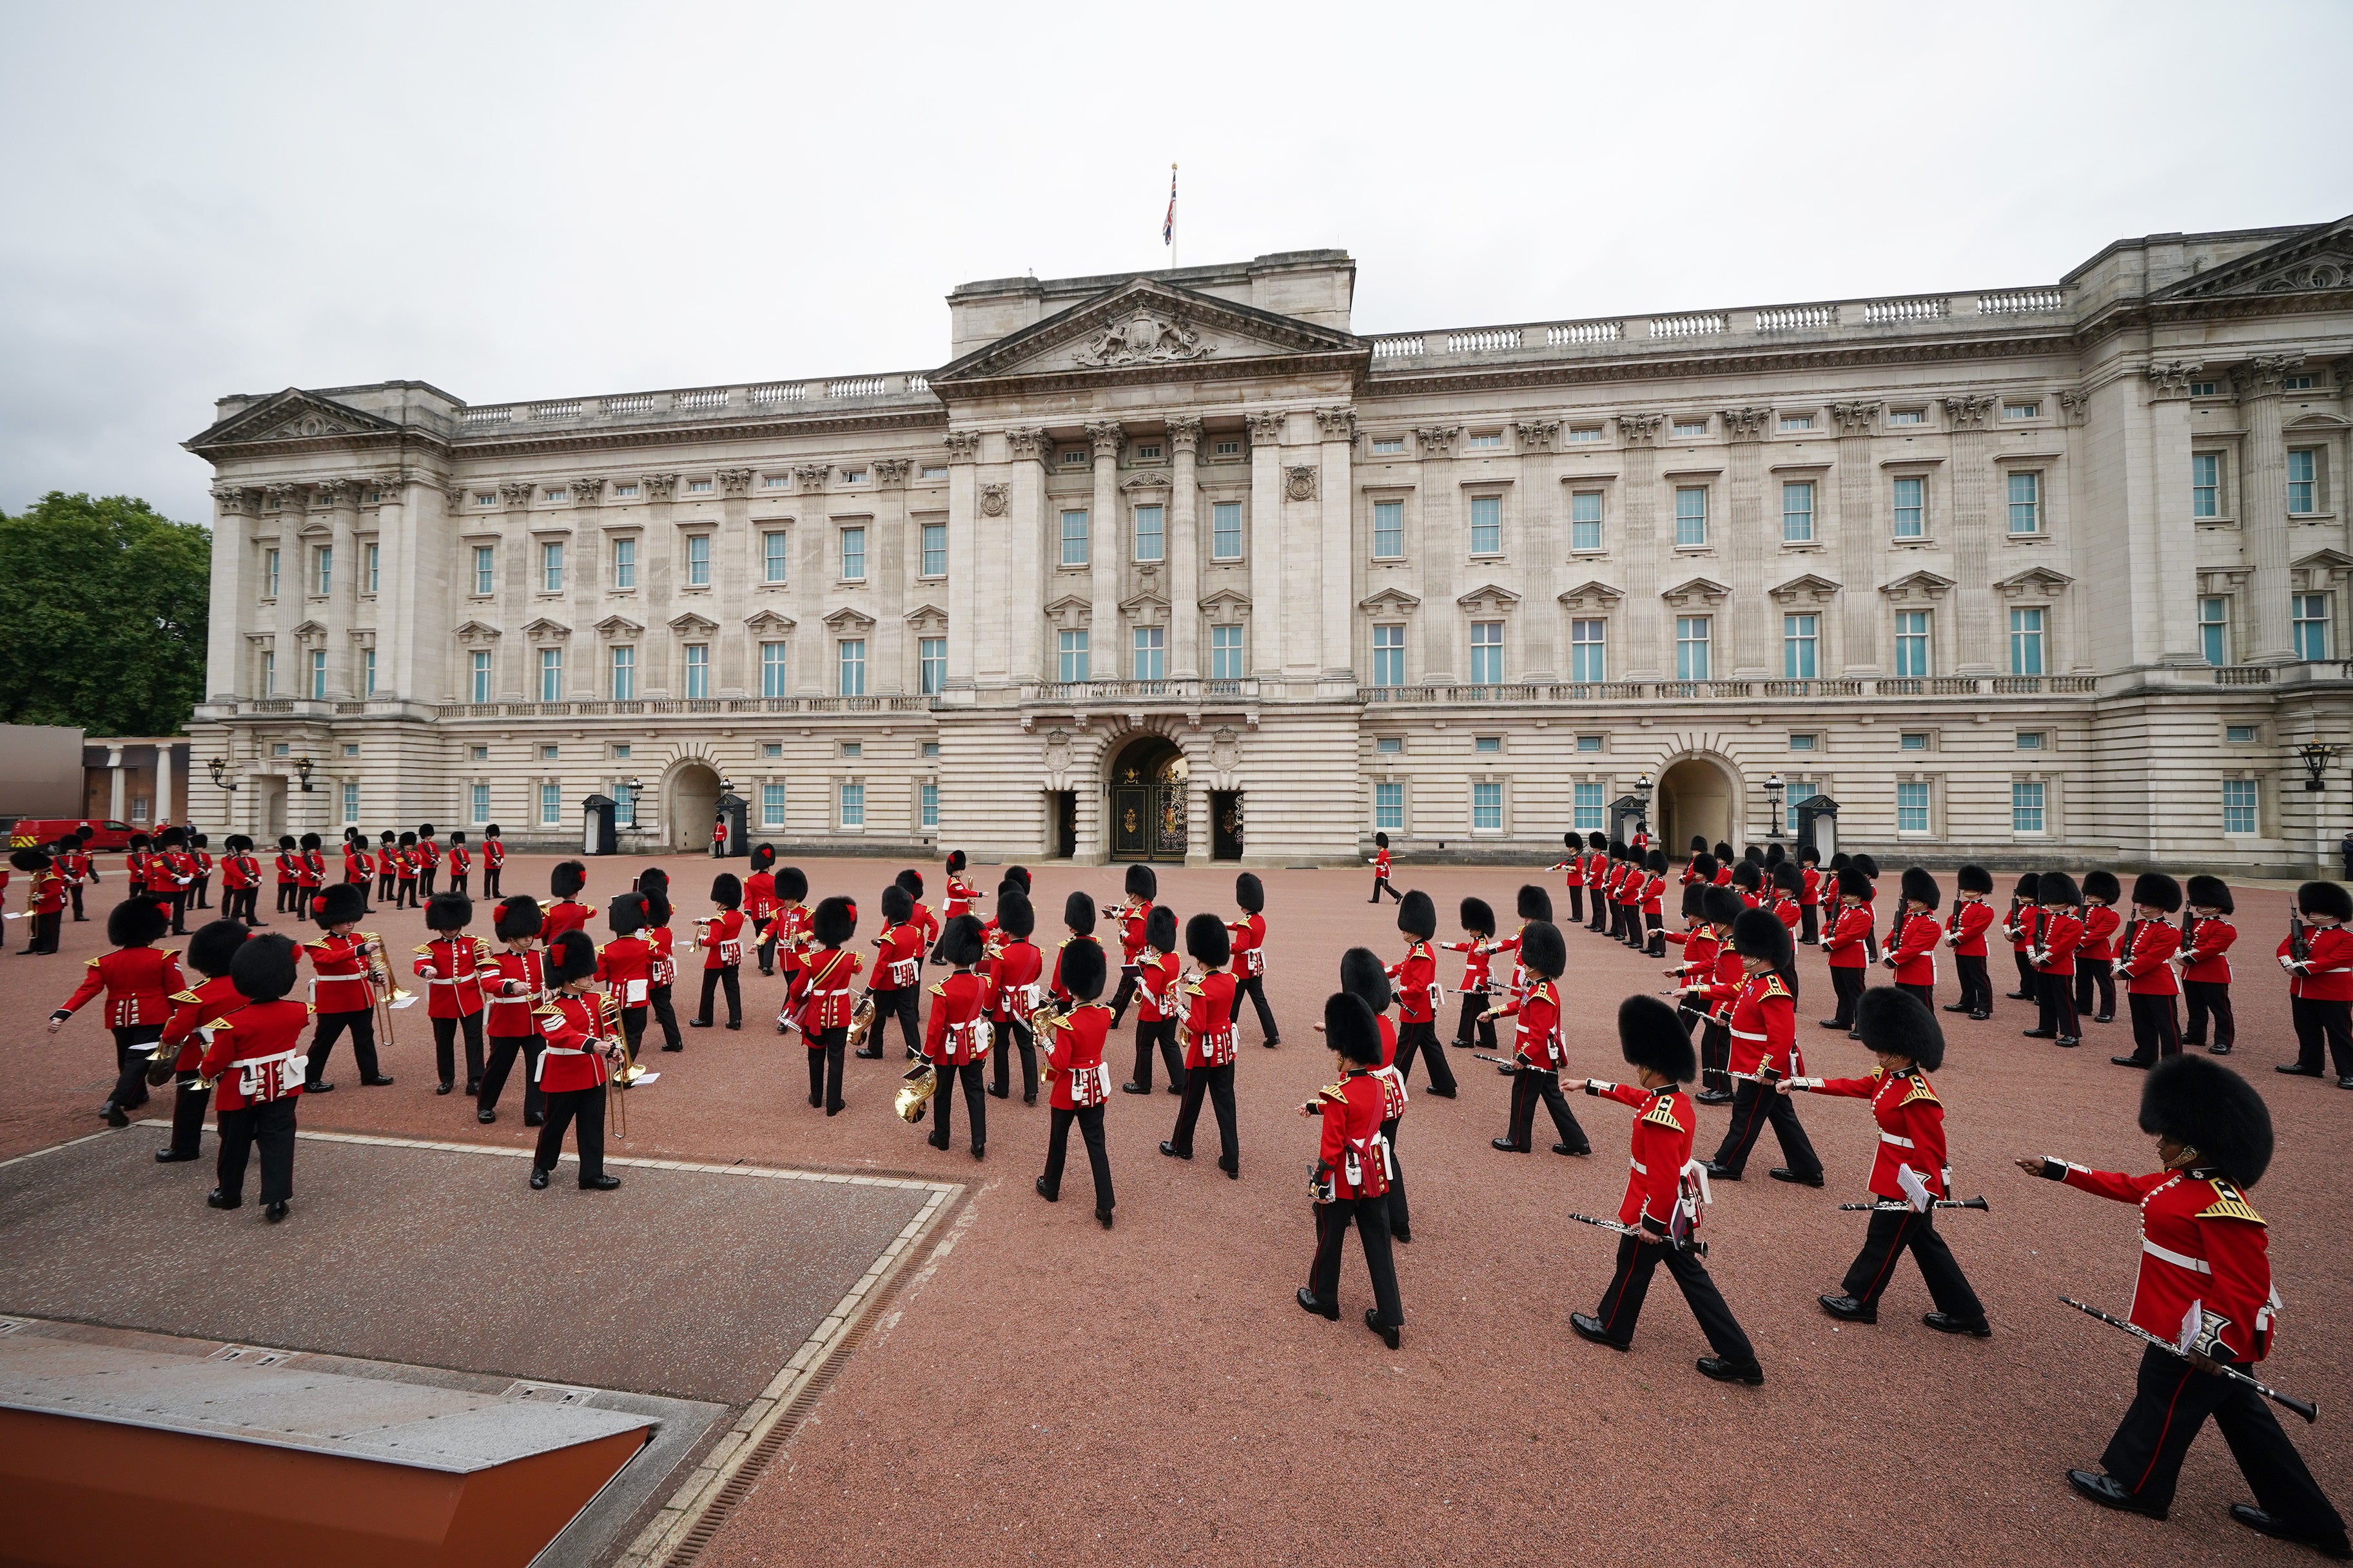 The Changing of the Guard takes place at Buckingham Palace on 23 August, 2021.